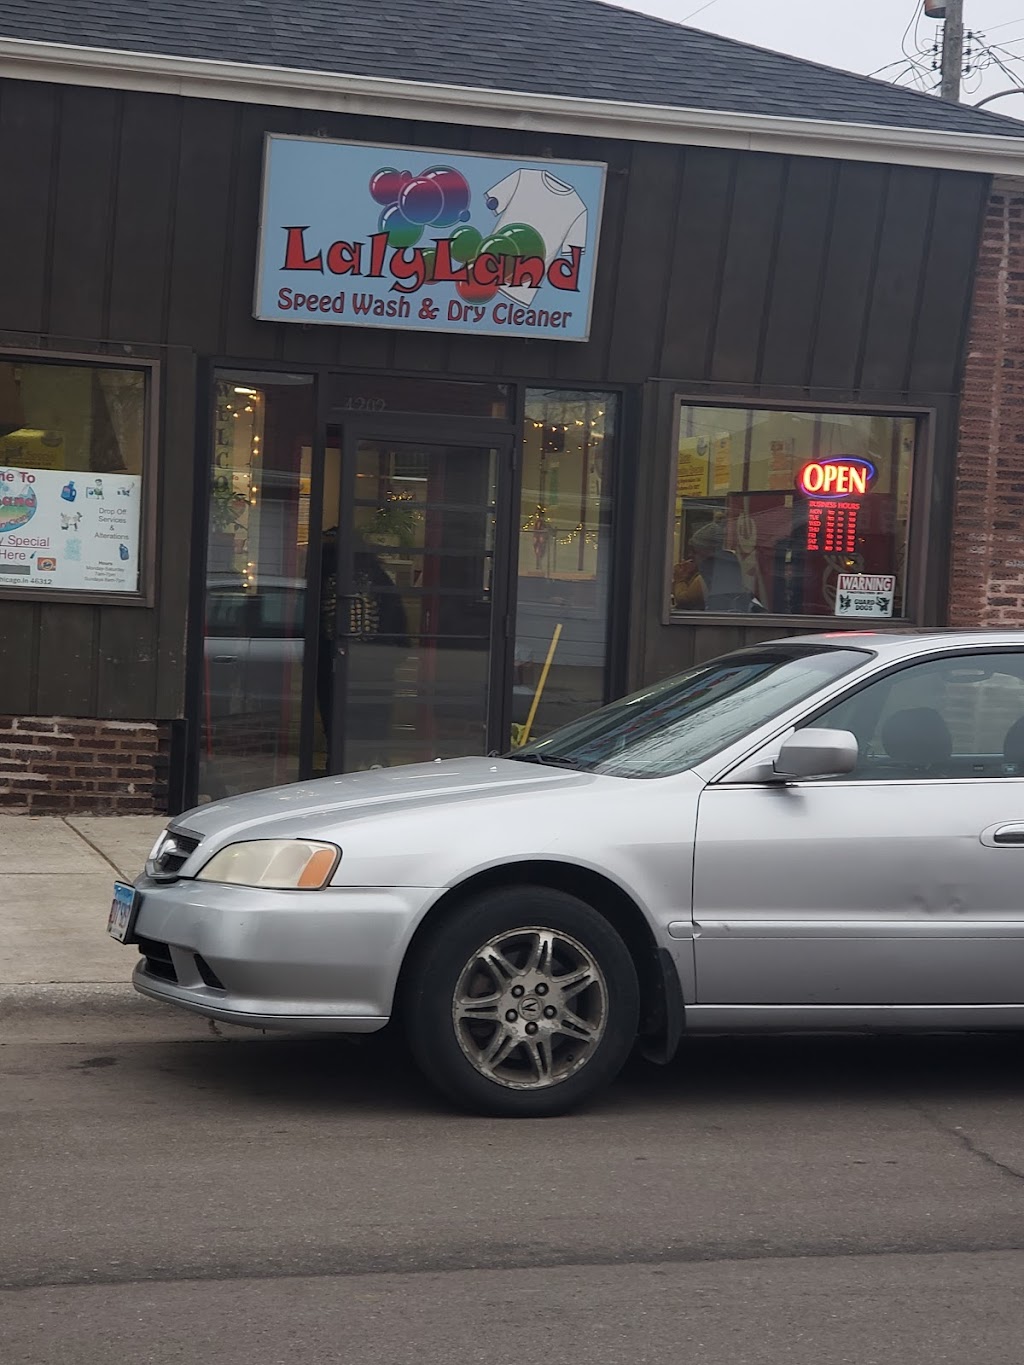 LalyLand Speed Wash & Dry Cleaners | 4202 Euclid Ave, East Chicago, IN 46312 | Phone: (219) 916-0400